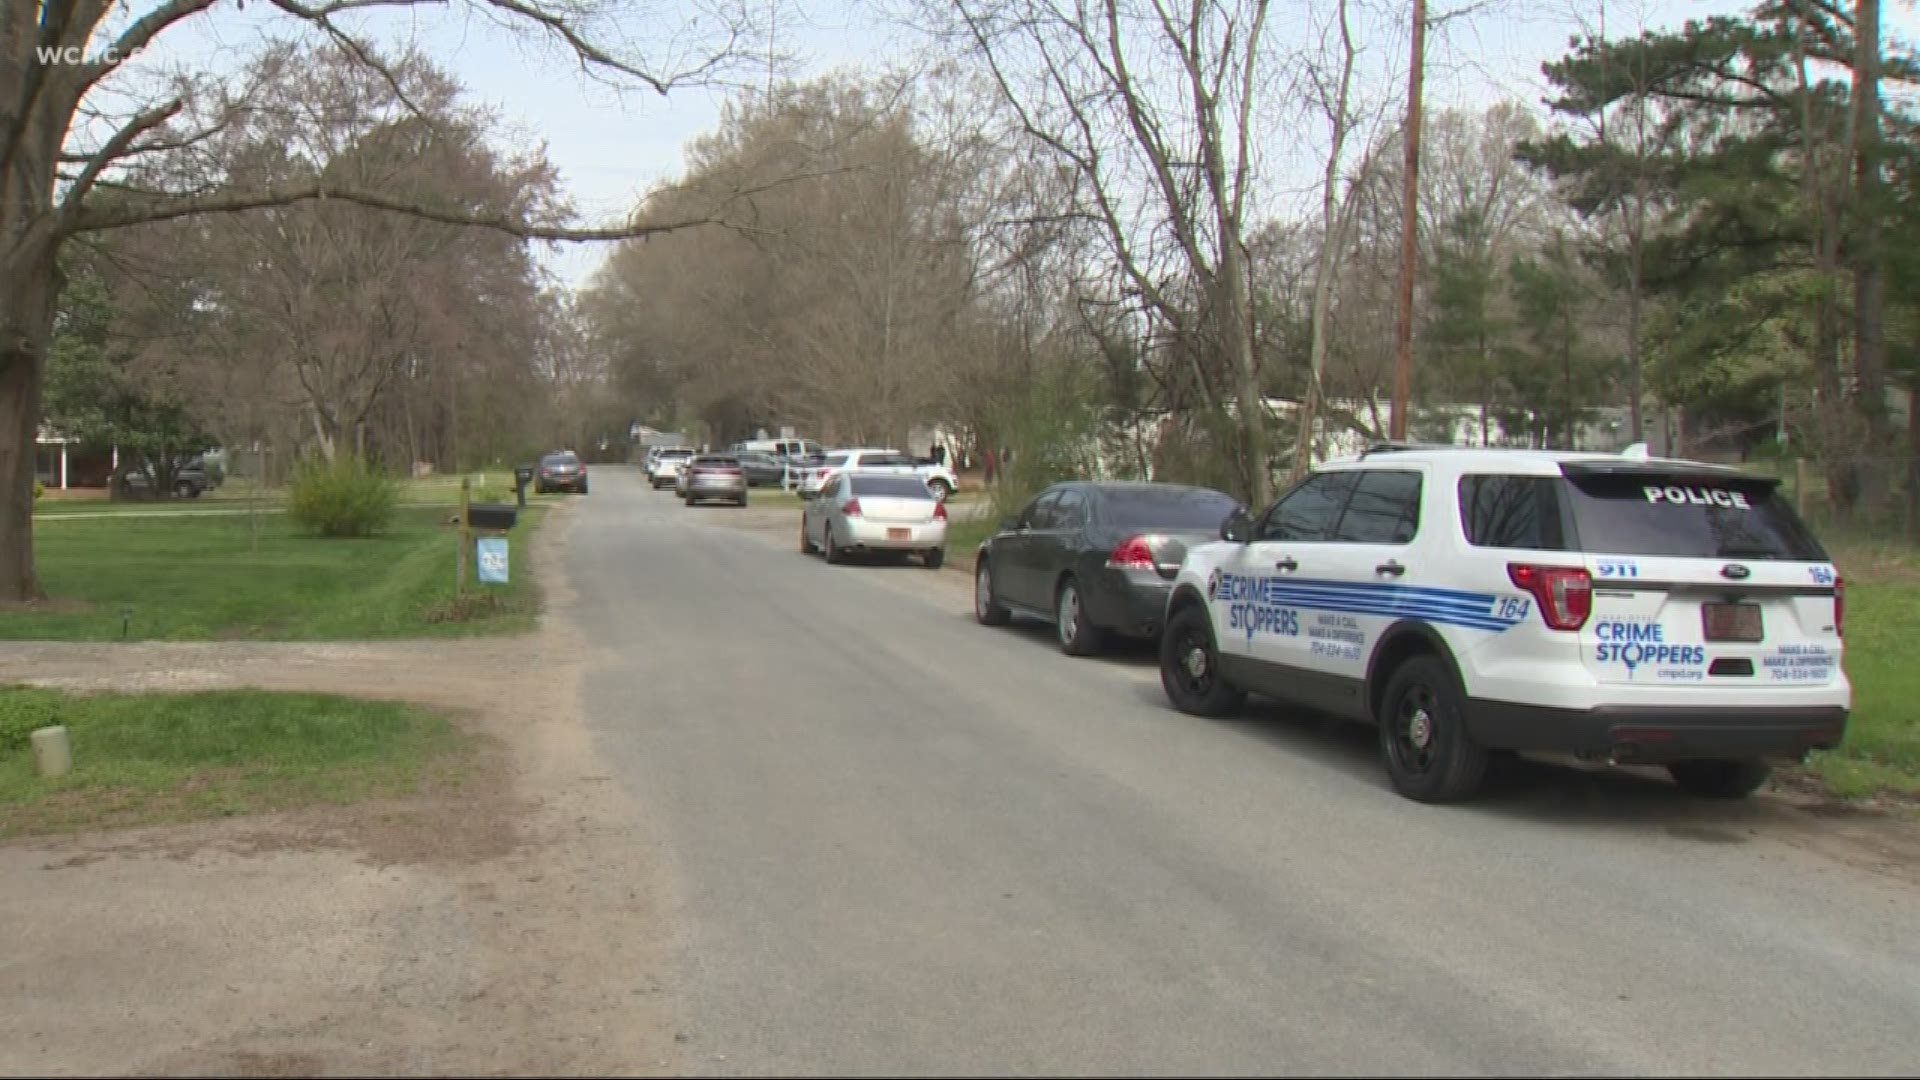 Charlotte-Mecklenburg Police are investigating a homicide near Reedy Creek in east Charlotte after a man was found dead Monday.